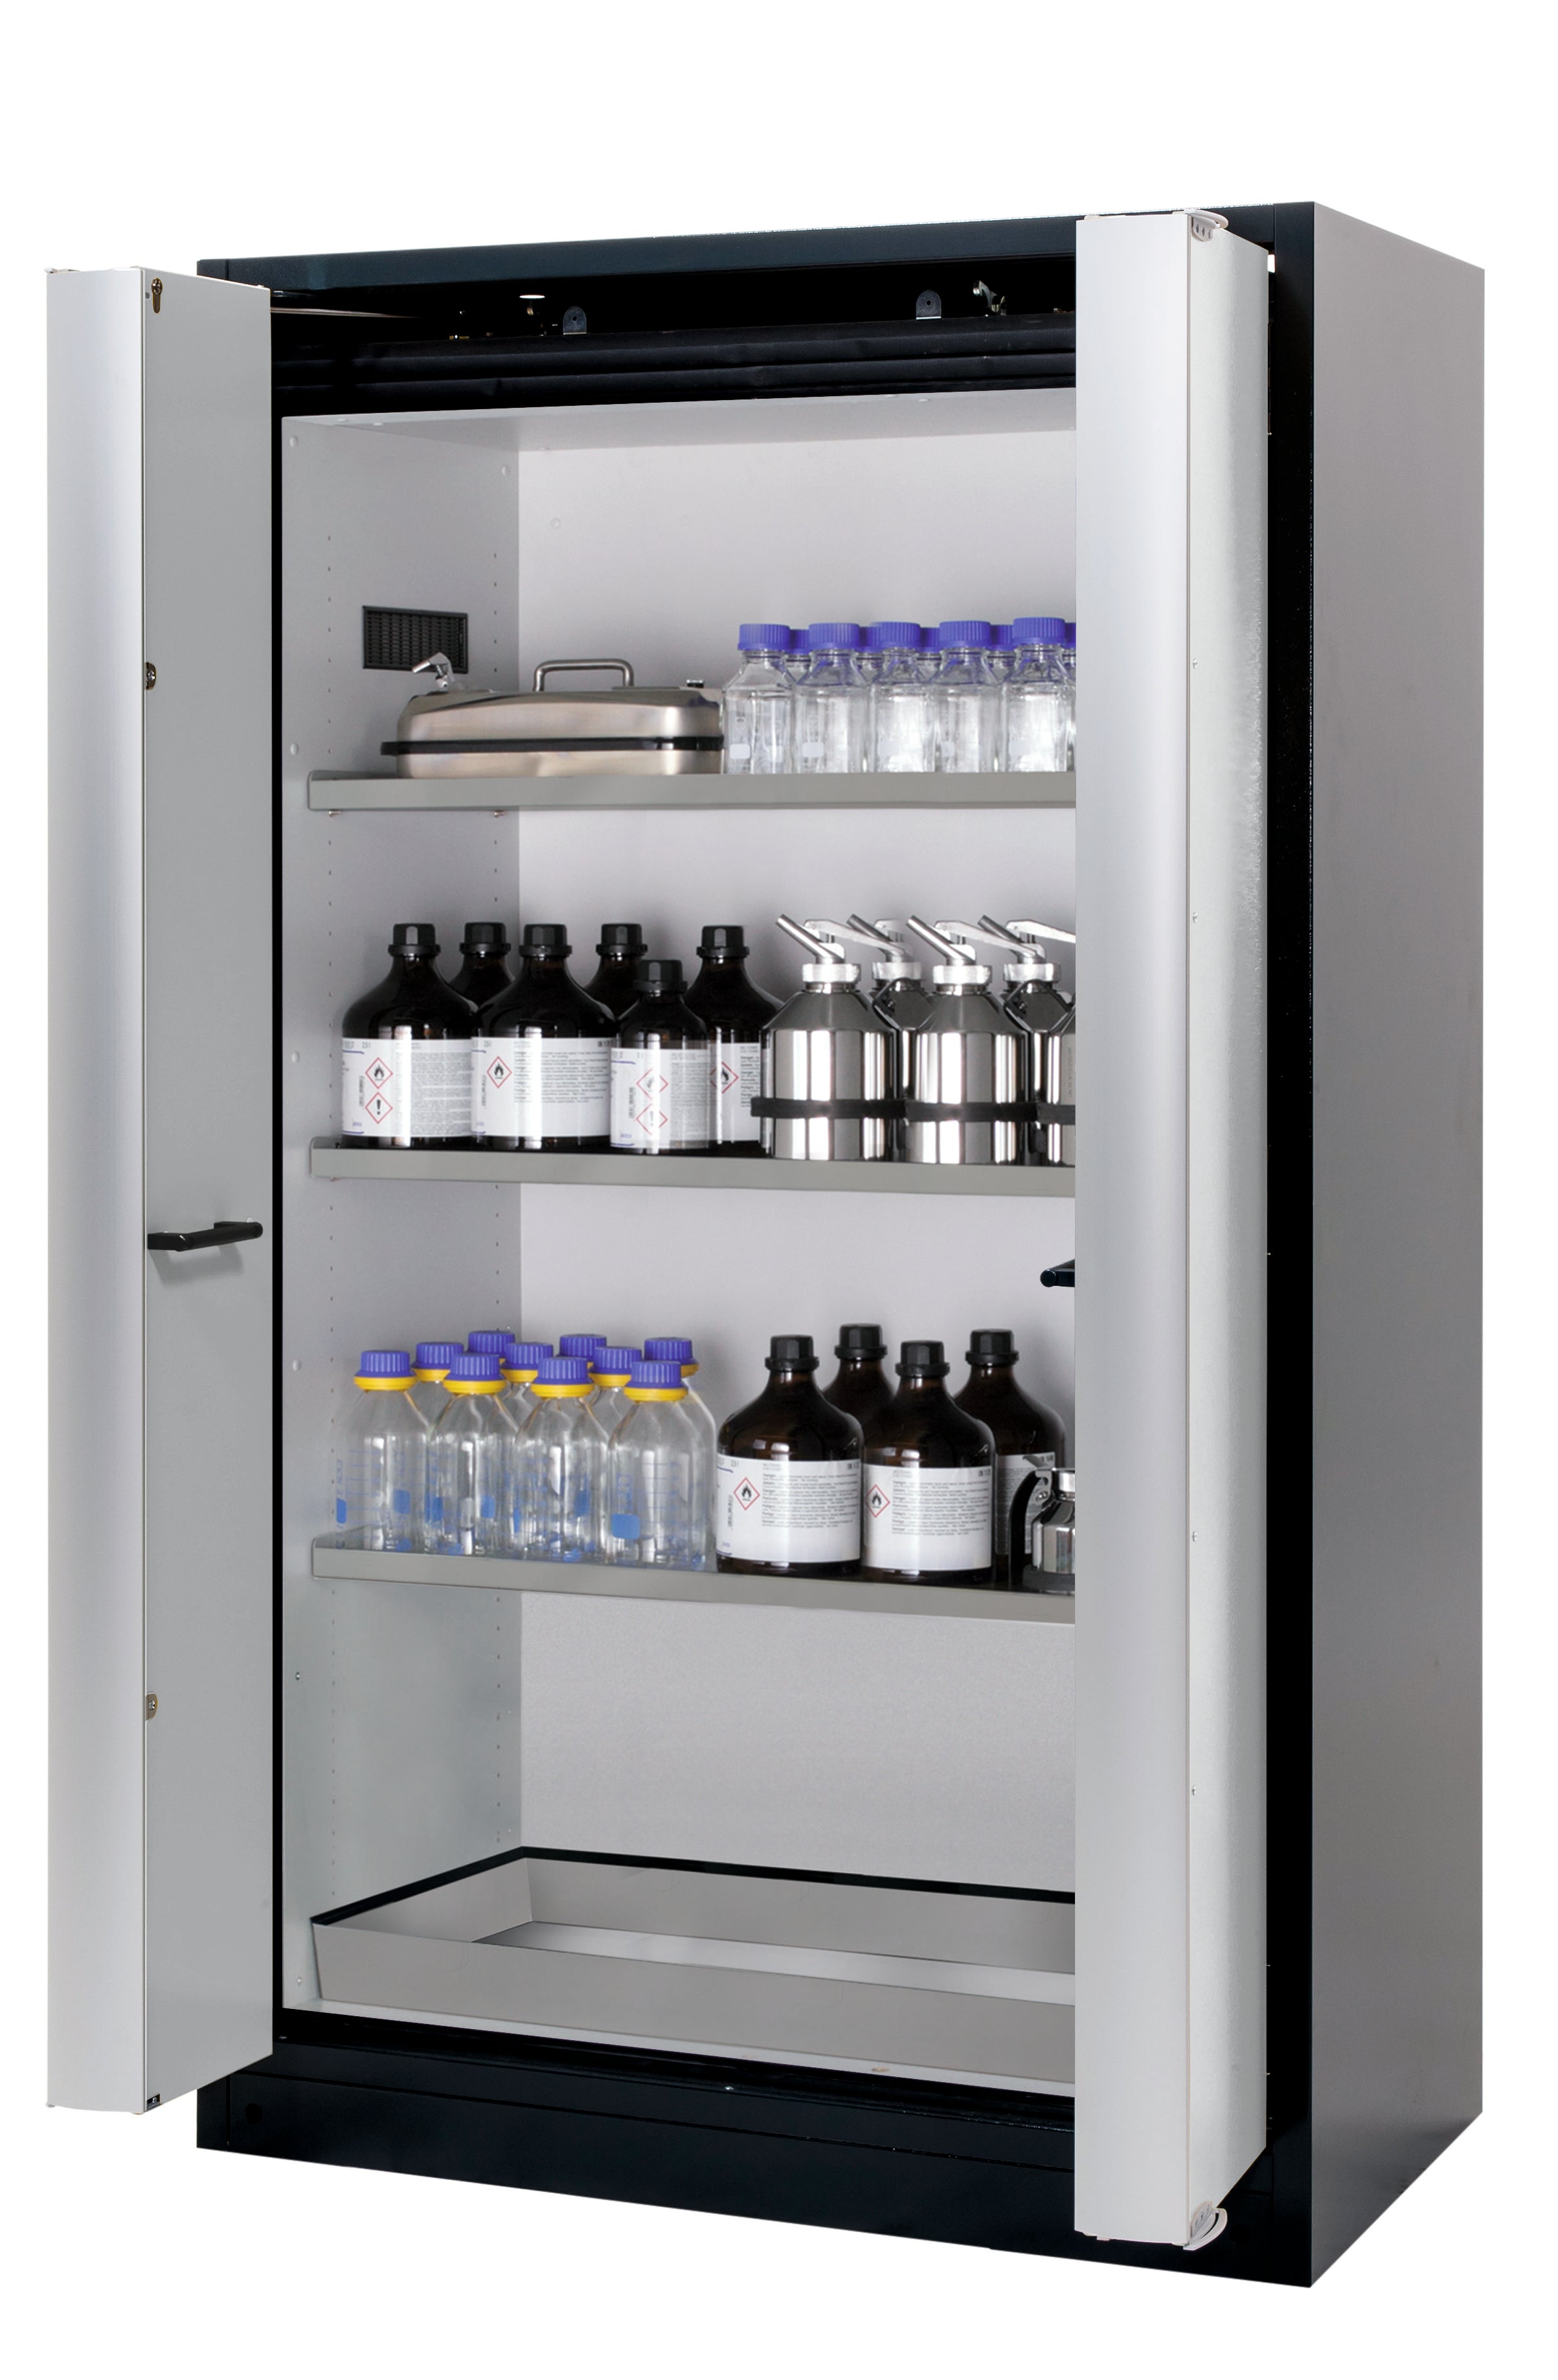 Type 90 safety cabinet Q-PHOENIX-90 model Q90.195.120.FD in light gray RAL 7035 with 3x standard shelves (stainless steel 1.4301)